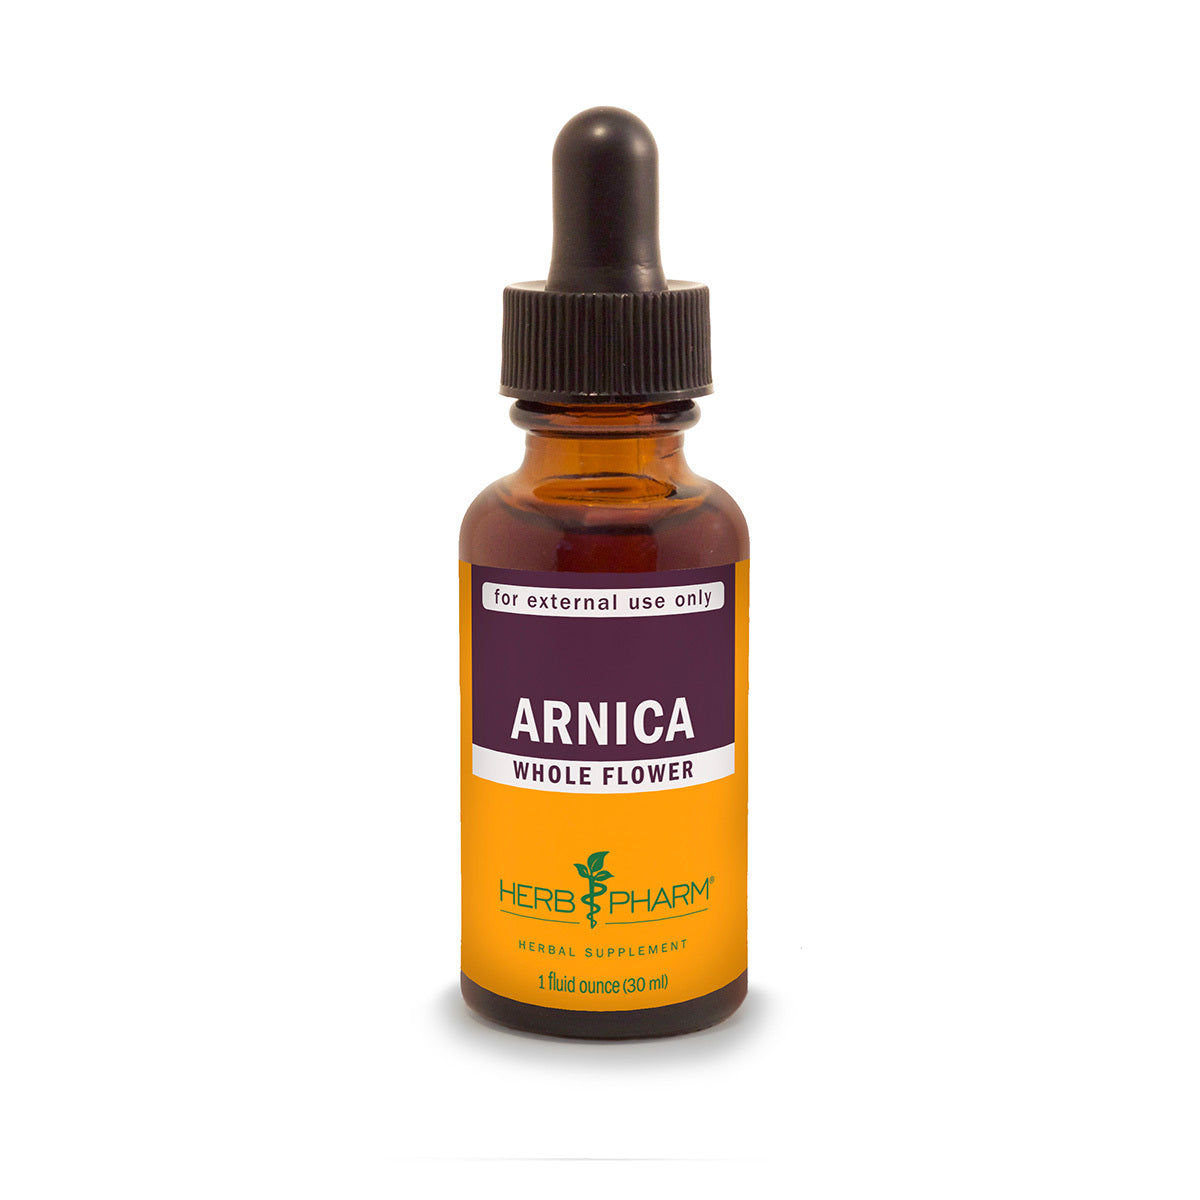 Primary image of Arnica Extract